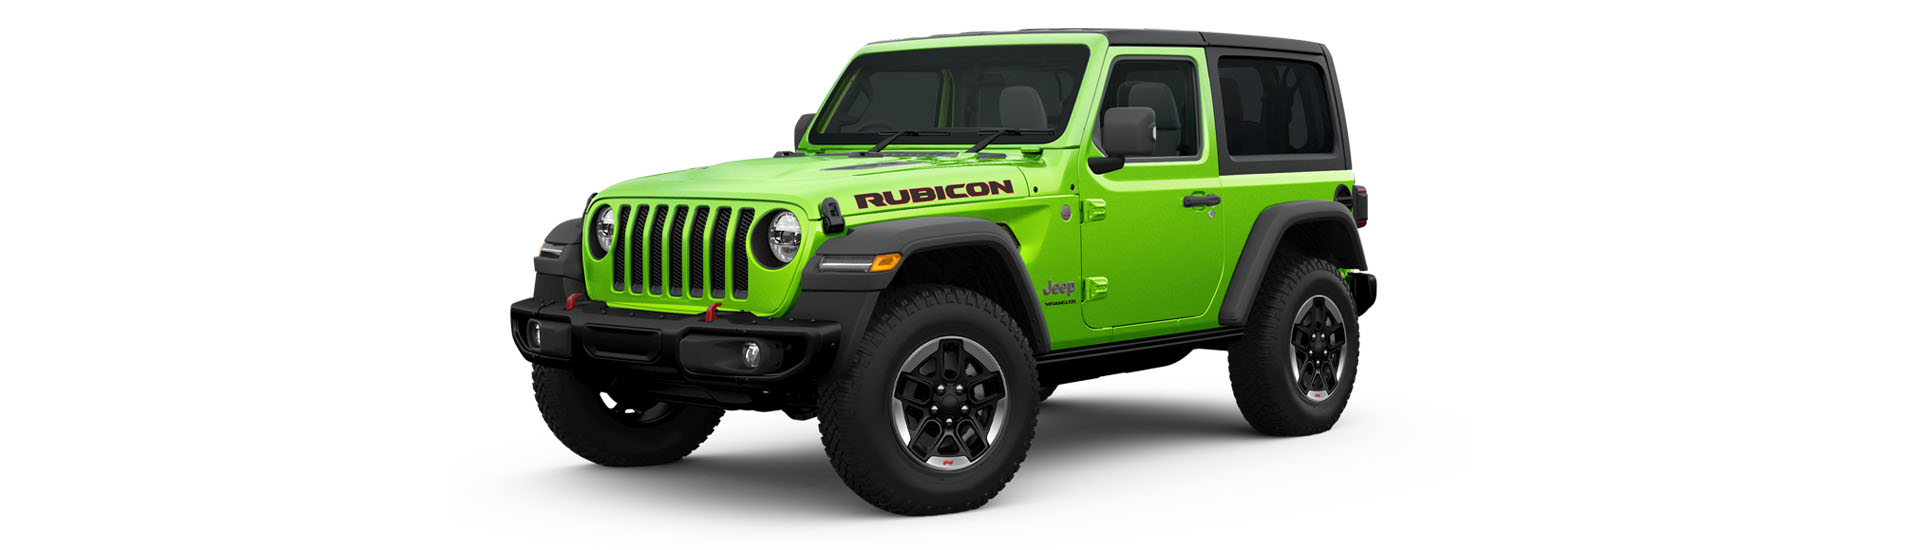 Jeep Wrangler 2021: off road ready Rubicon 'Shorty' coming to Australia  this year - Chasing Cars